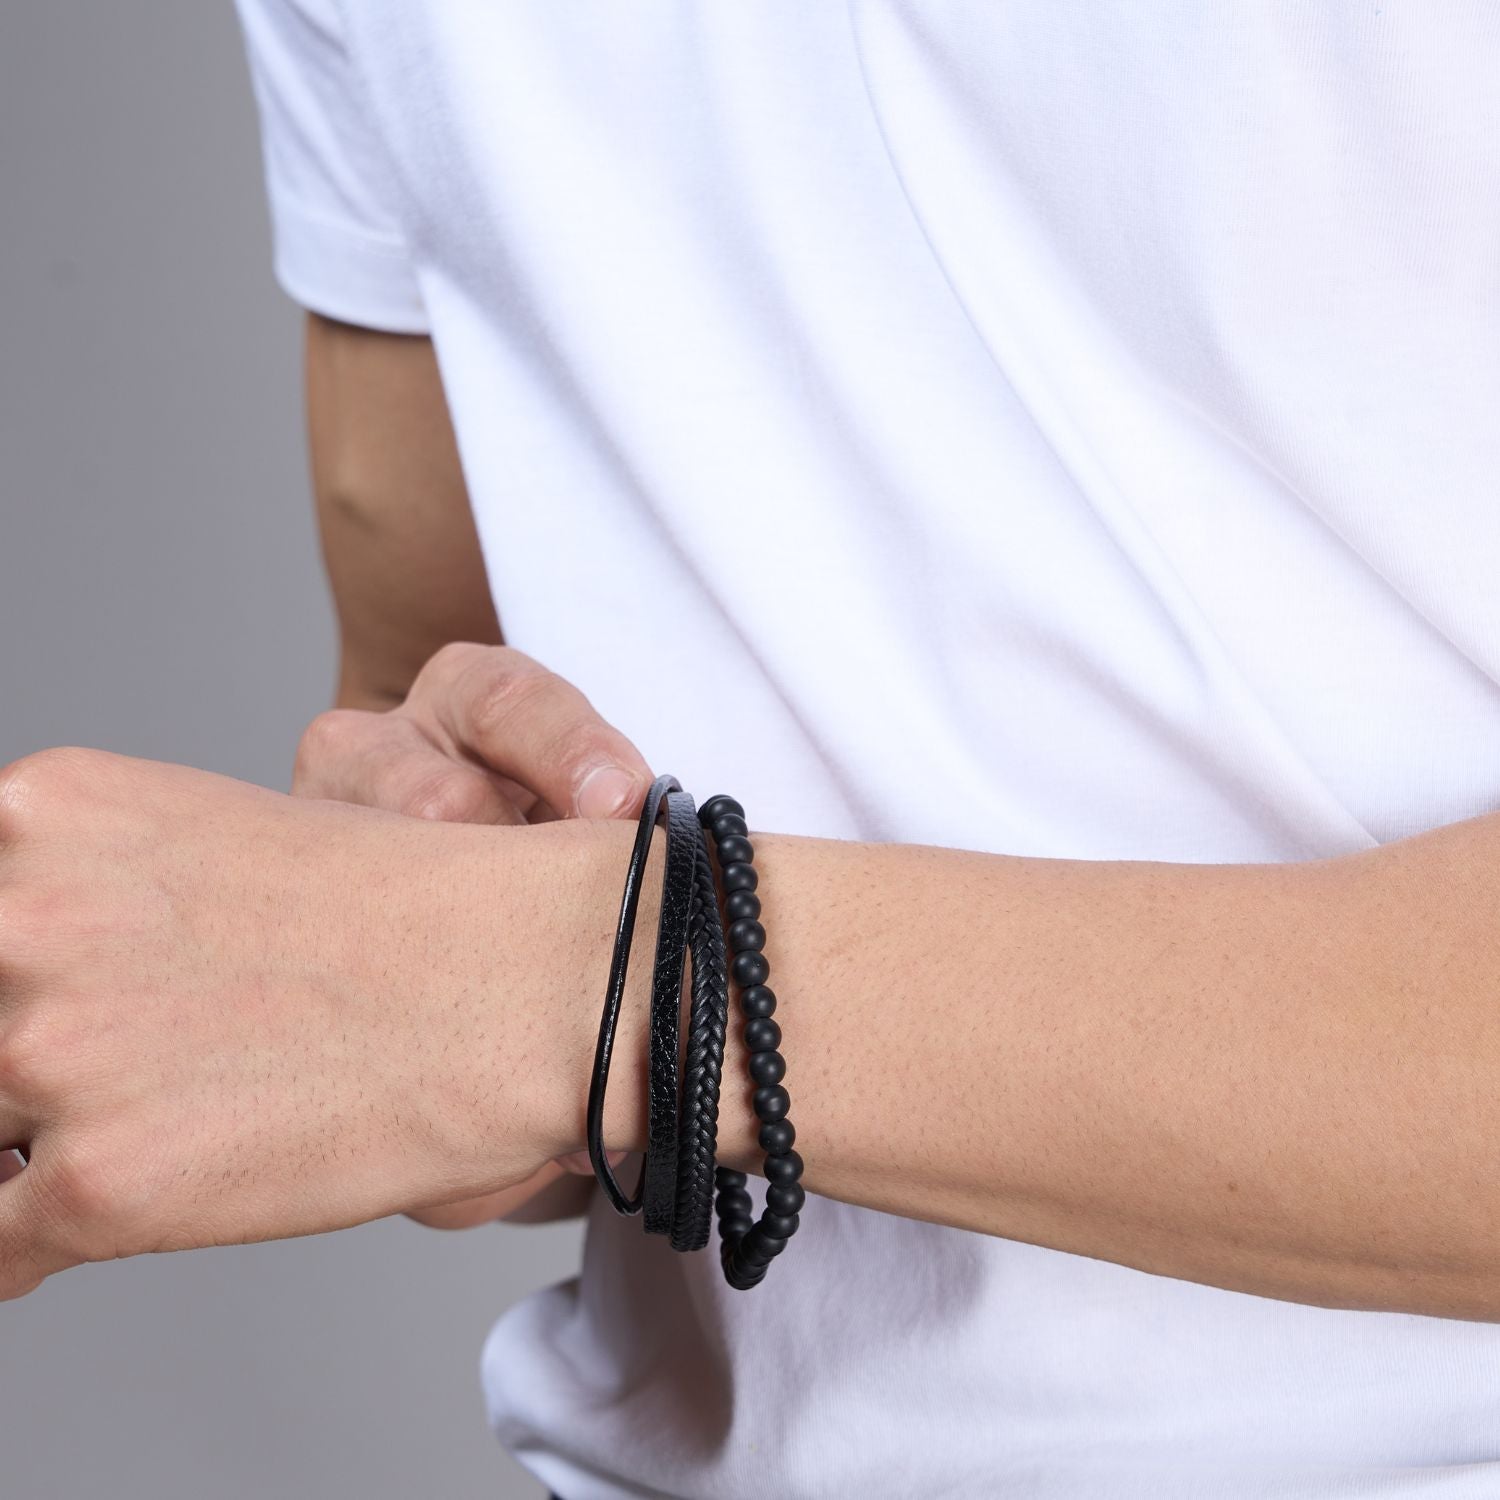 Black colored Multi-style Bracelet for men, with magnetic clasp, detailed side view.